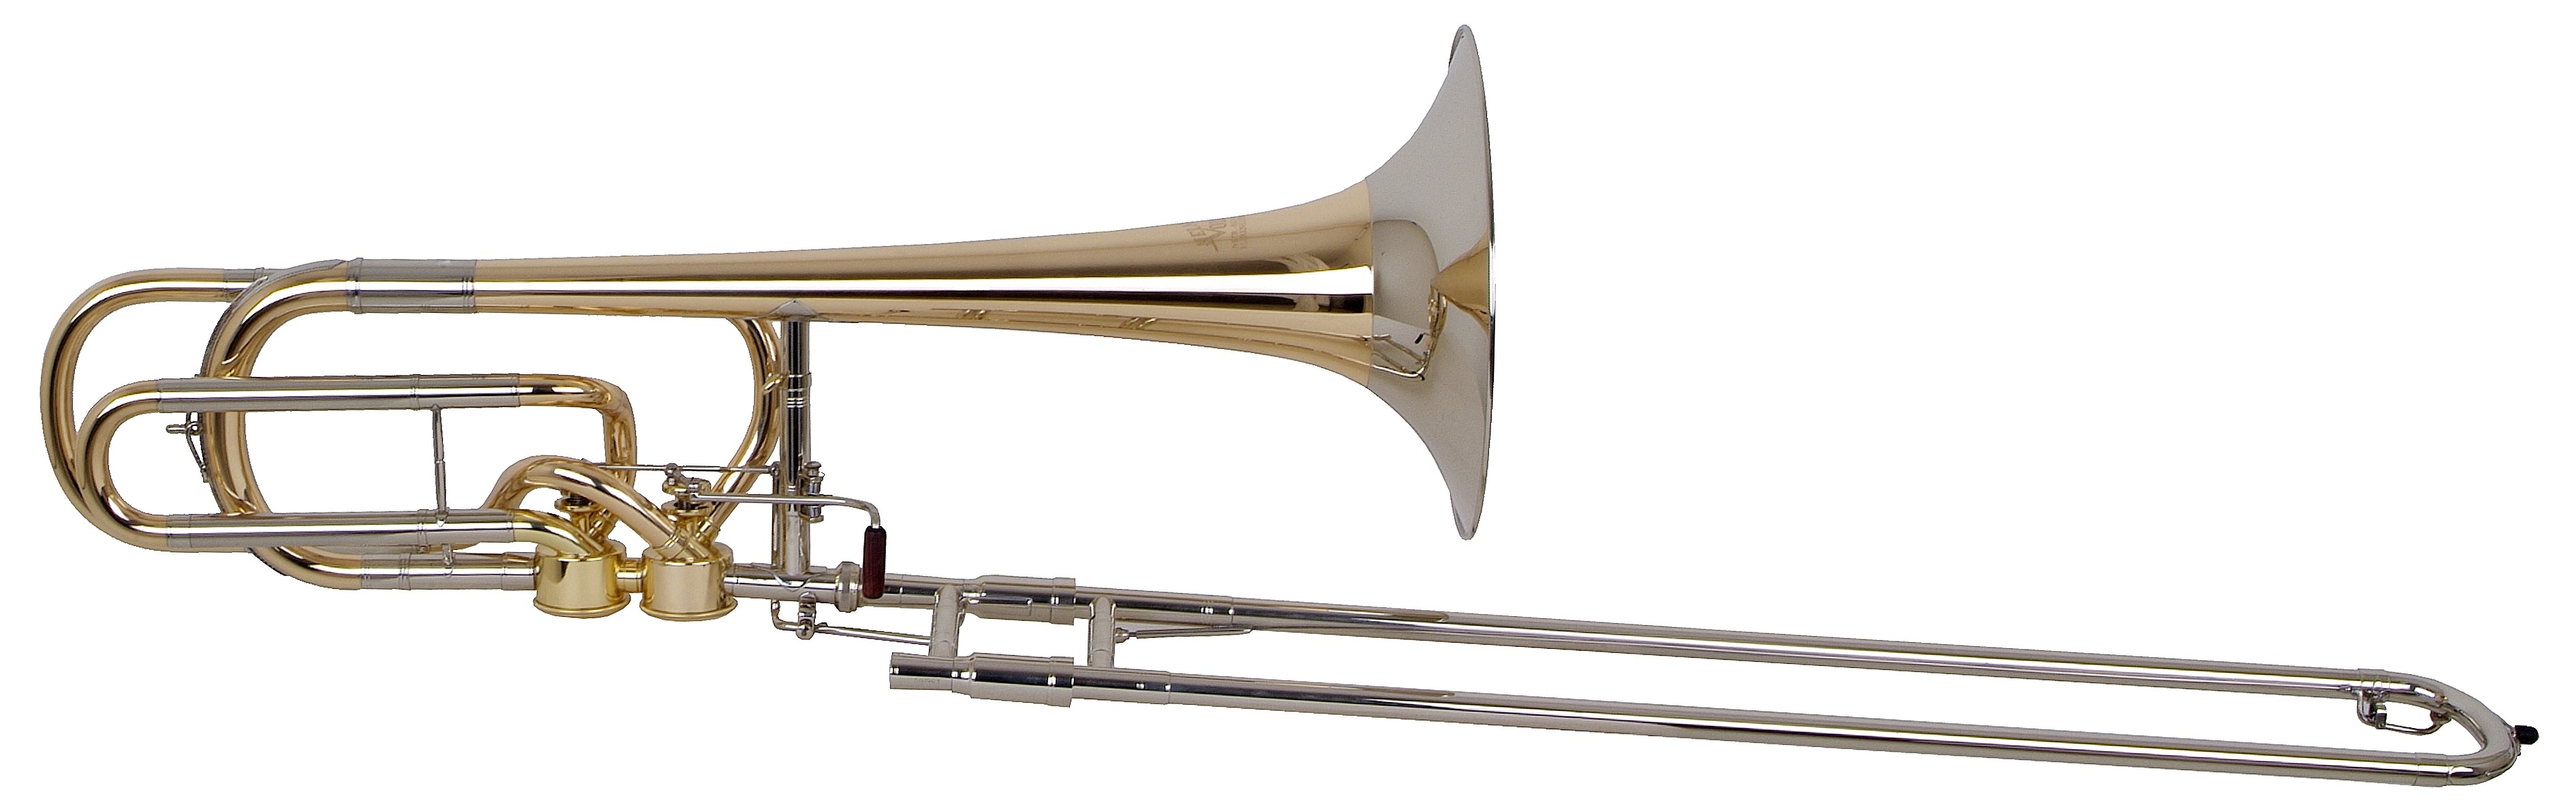 Trombone: Bass trombones, Helmut Voigt, A brass instrument, A low-pitched counterpart of the trumpet. 3780x1190 Dual Screen Background.